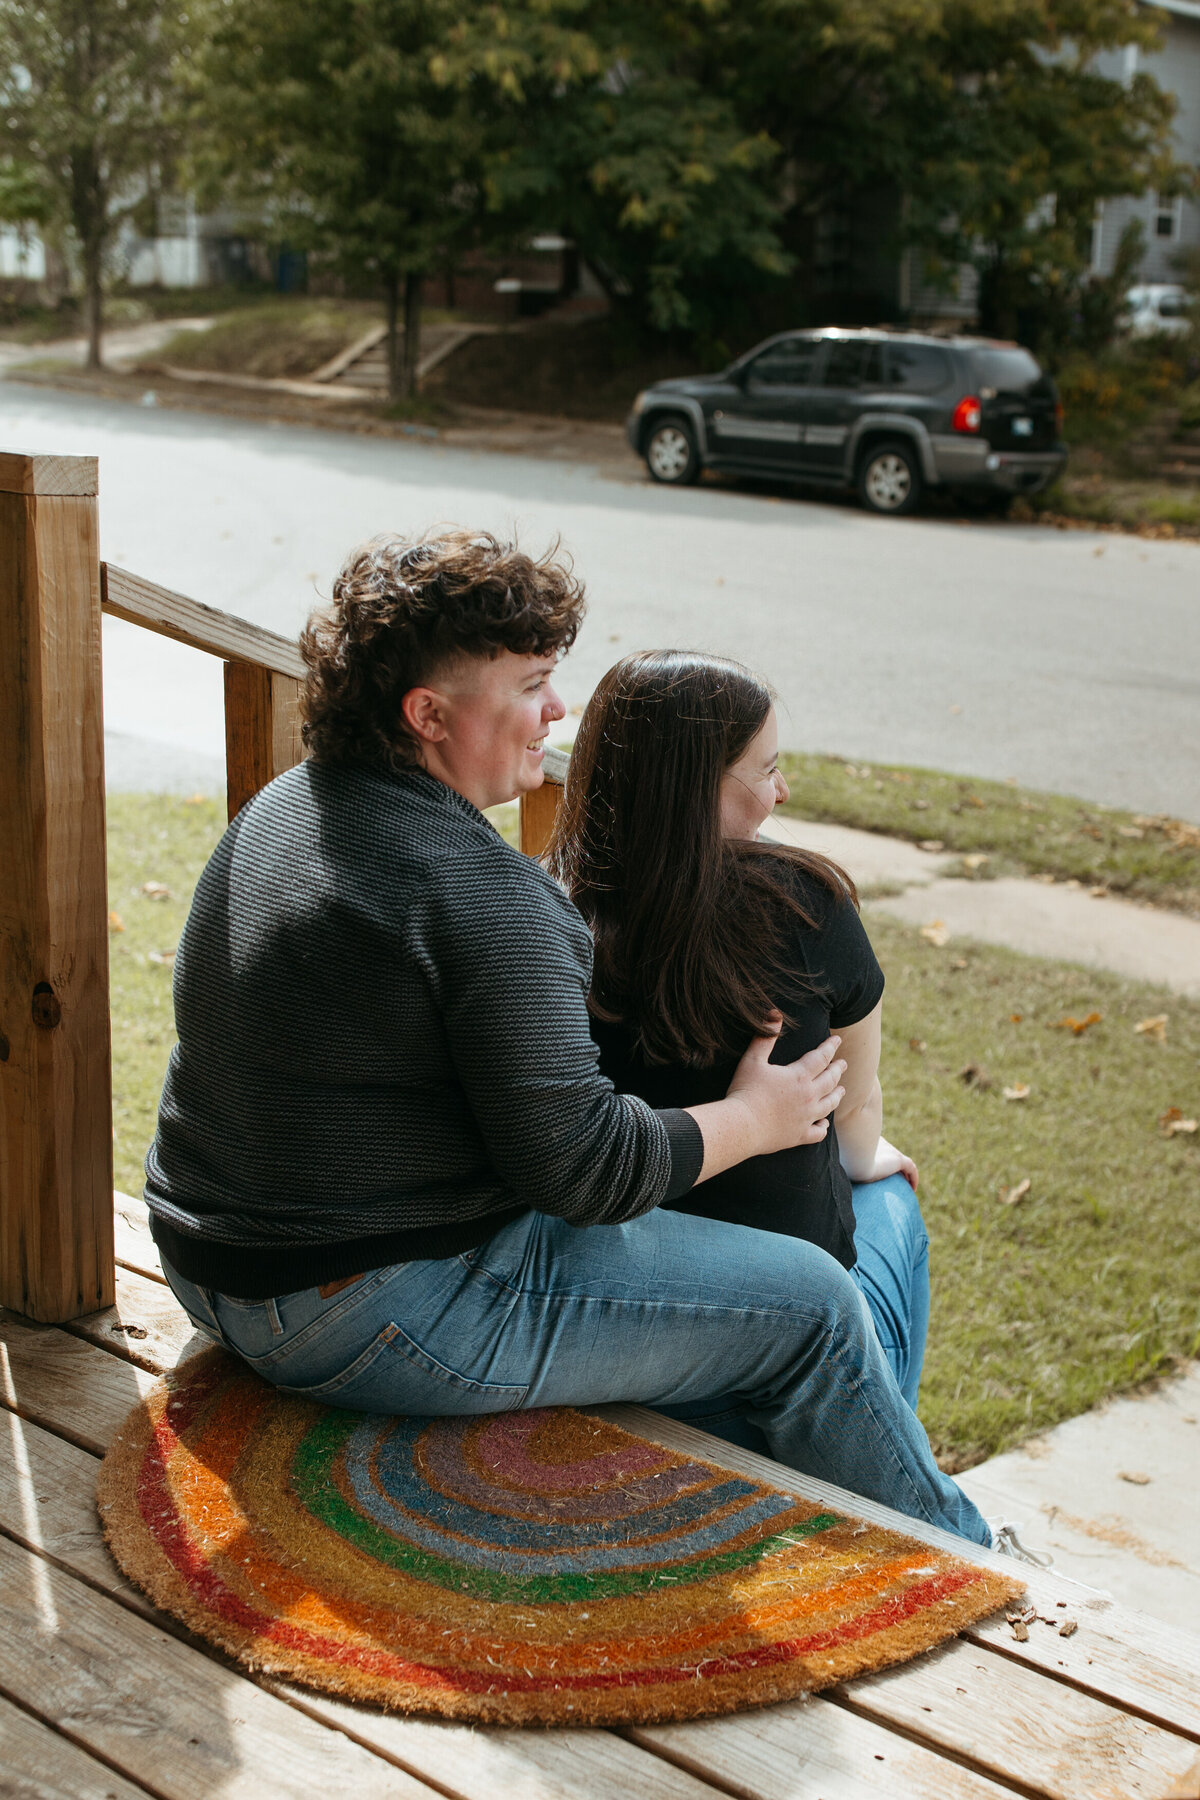 Two people sitting closely together on a colorful front porch mat, enjoying a quiet moment with a suburban street in the background